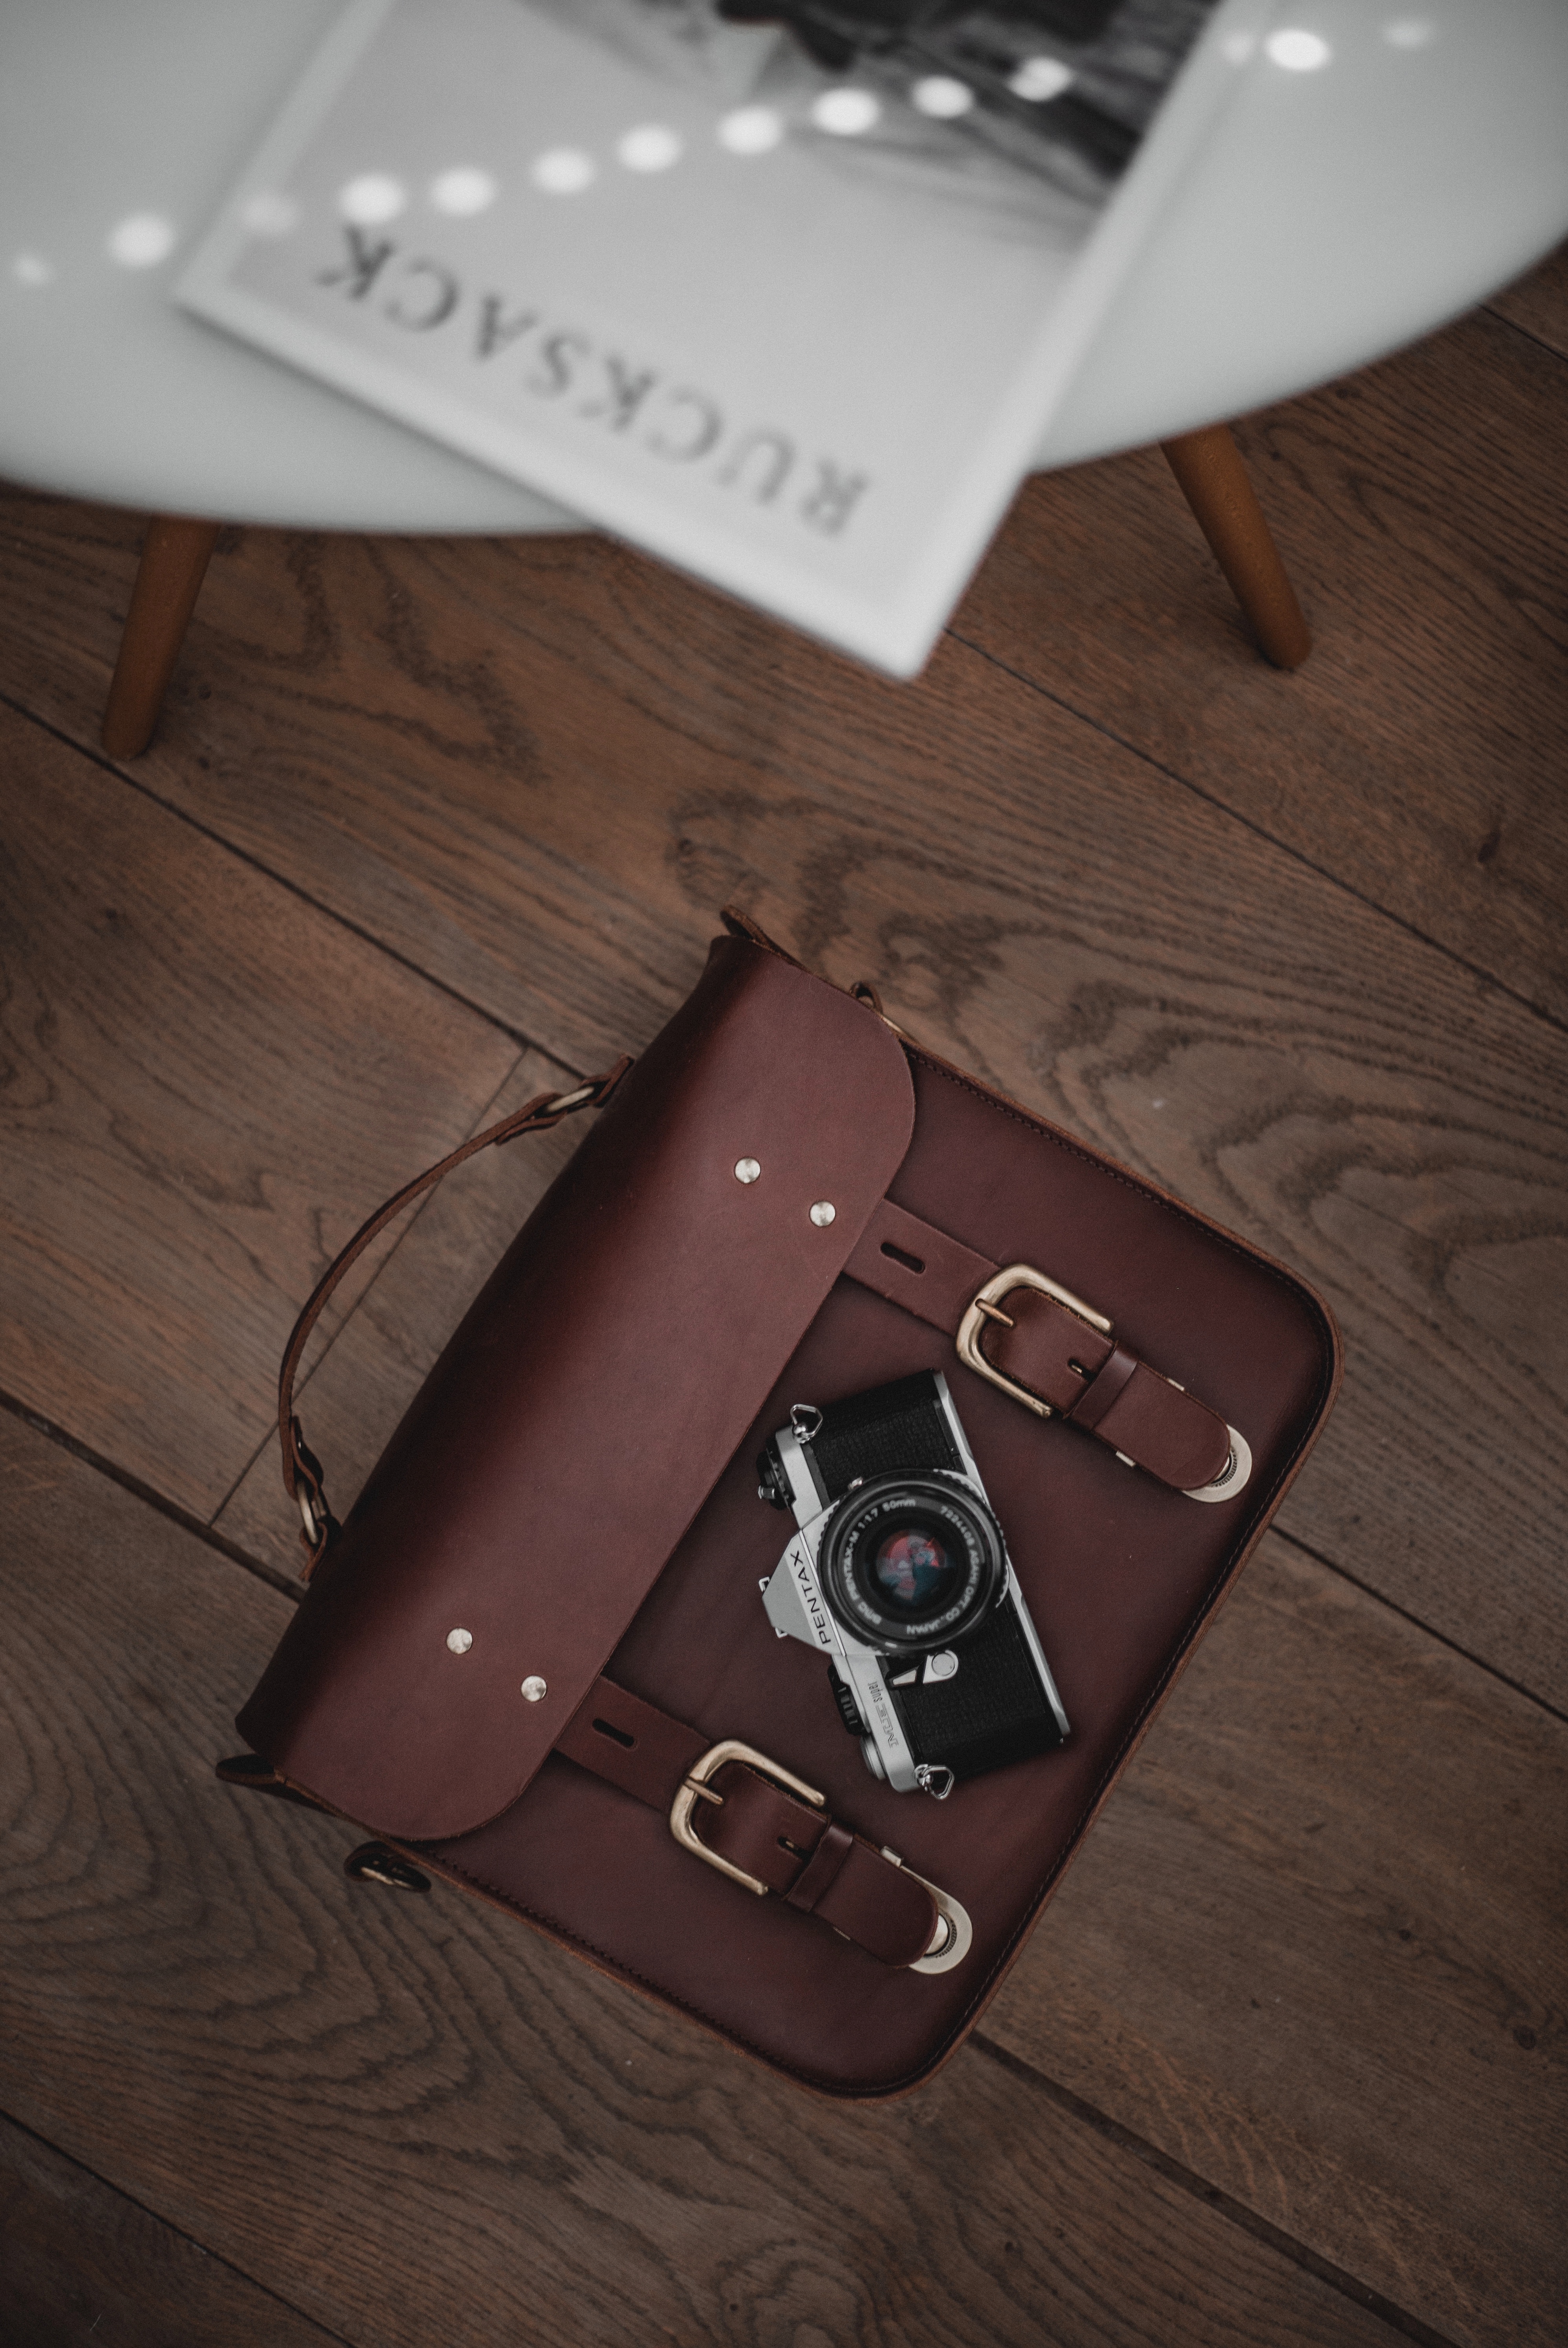 leather, technology, old, lens, technologies, bag, camera, floor, accessory